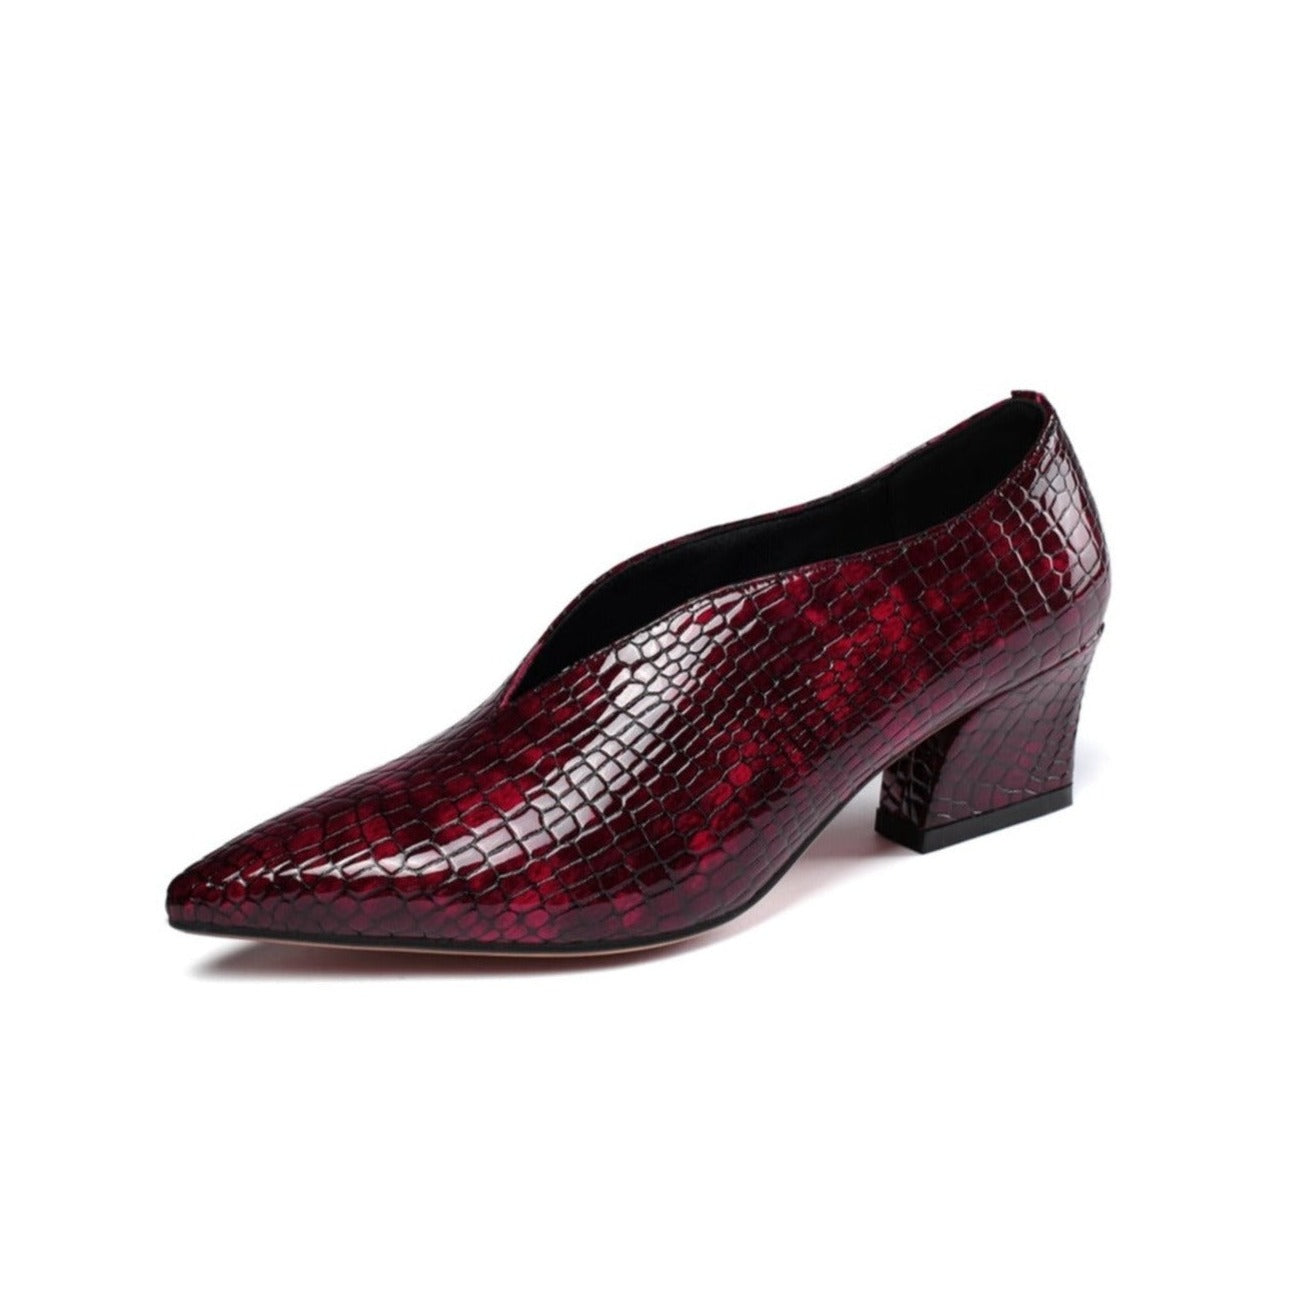 TinaCus Handmade Women's Patent Leather Slip On Printed Snakeskin Casual Shoes